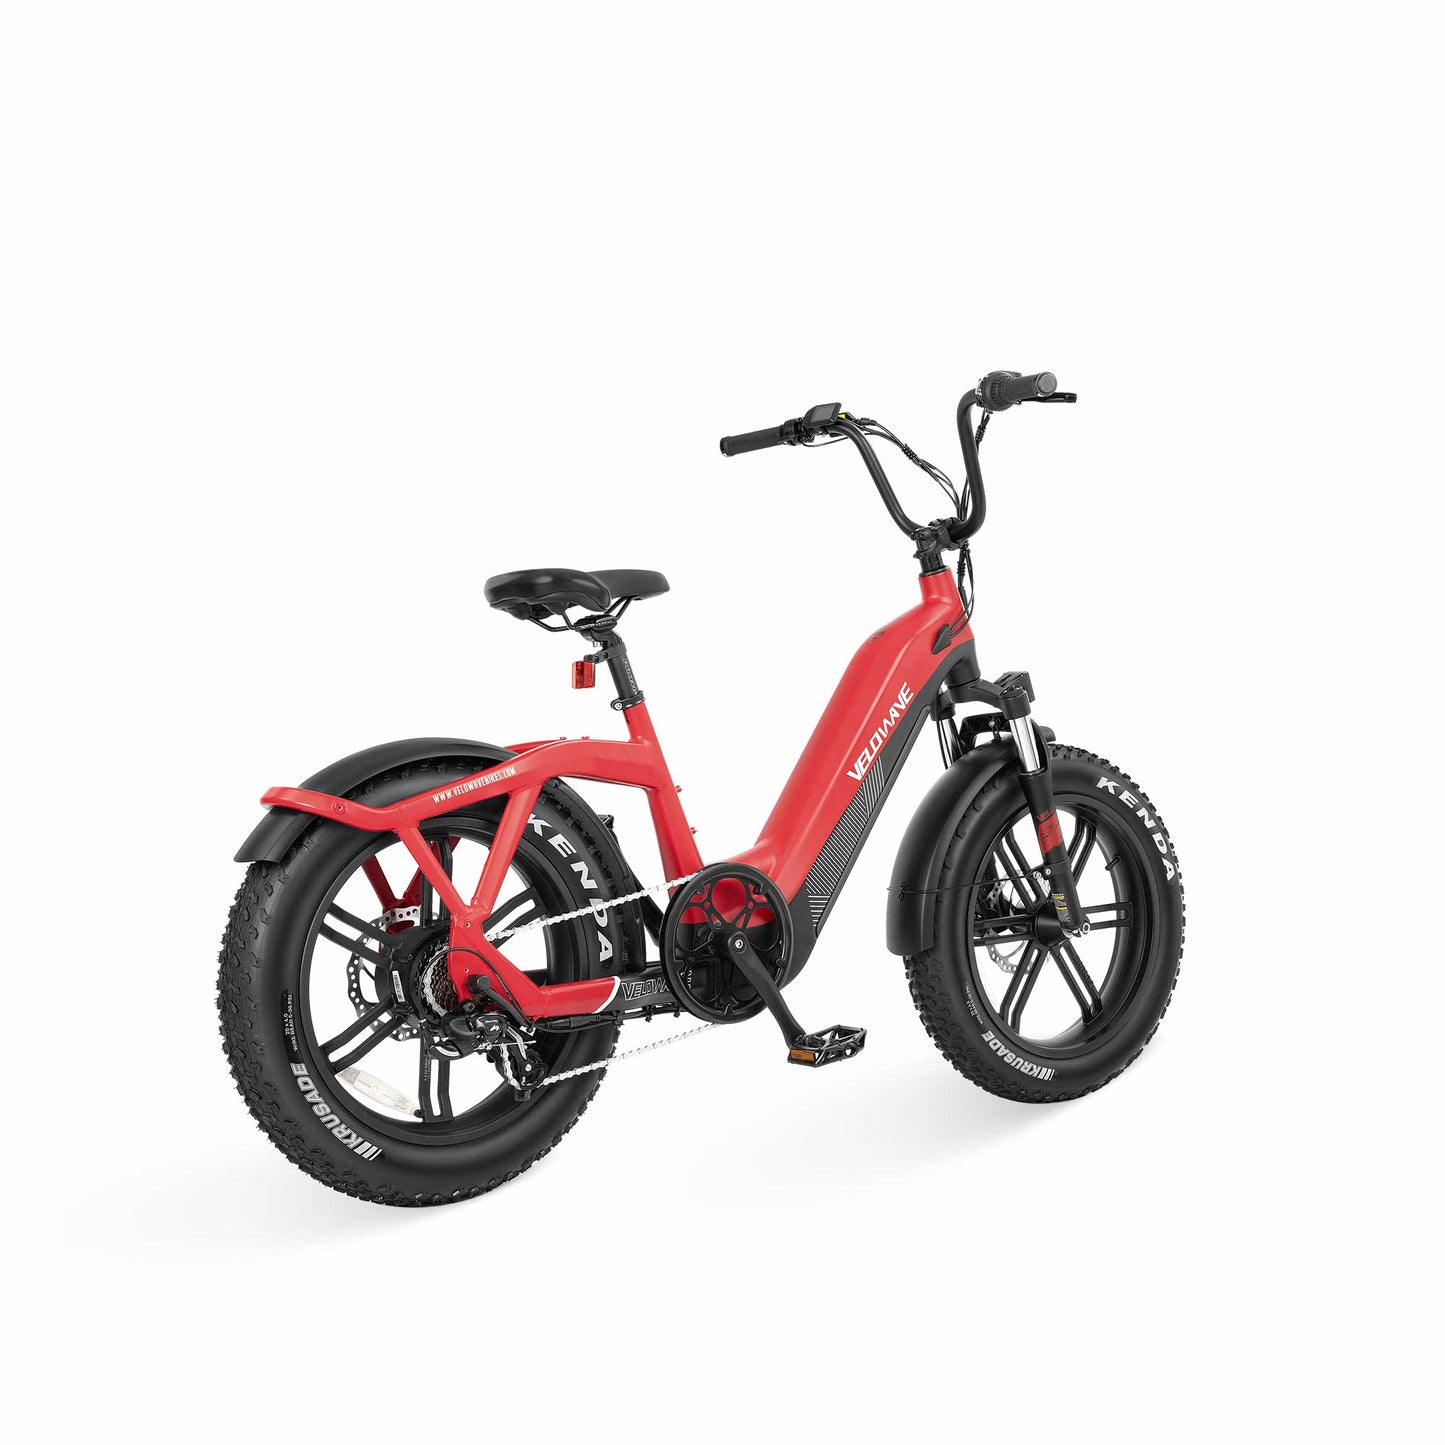 Velowave Pony Step Thru Electric Bike 20" Fat Tire 750W Motor with Suspension Fork for Comfort Riding